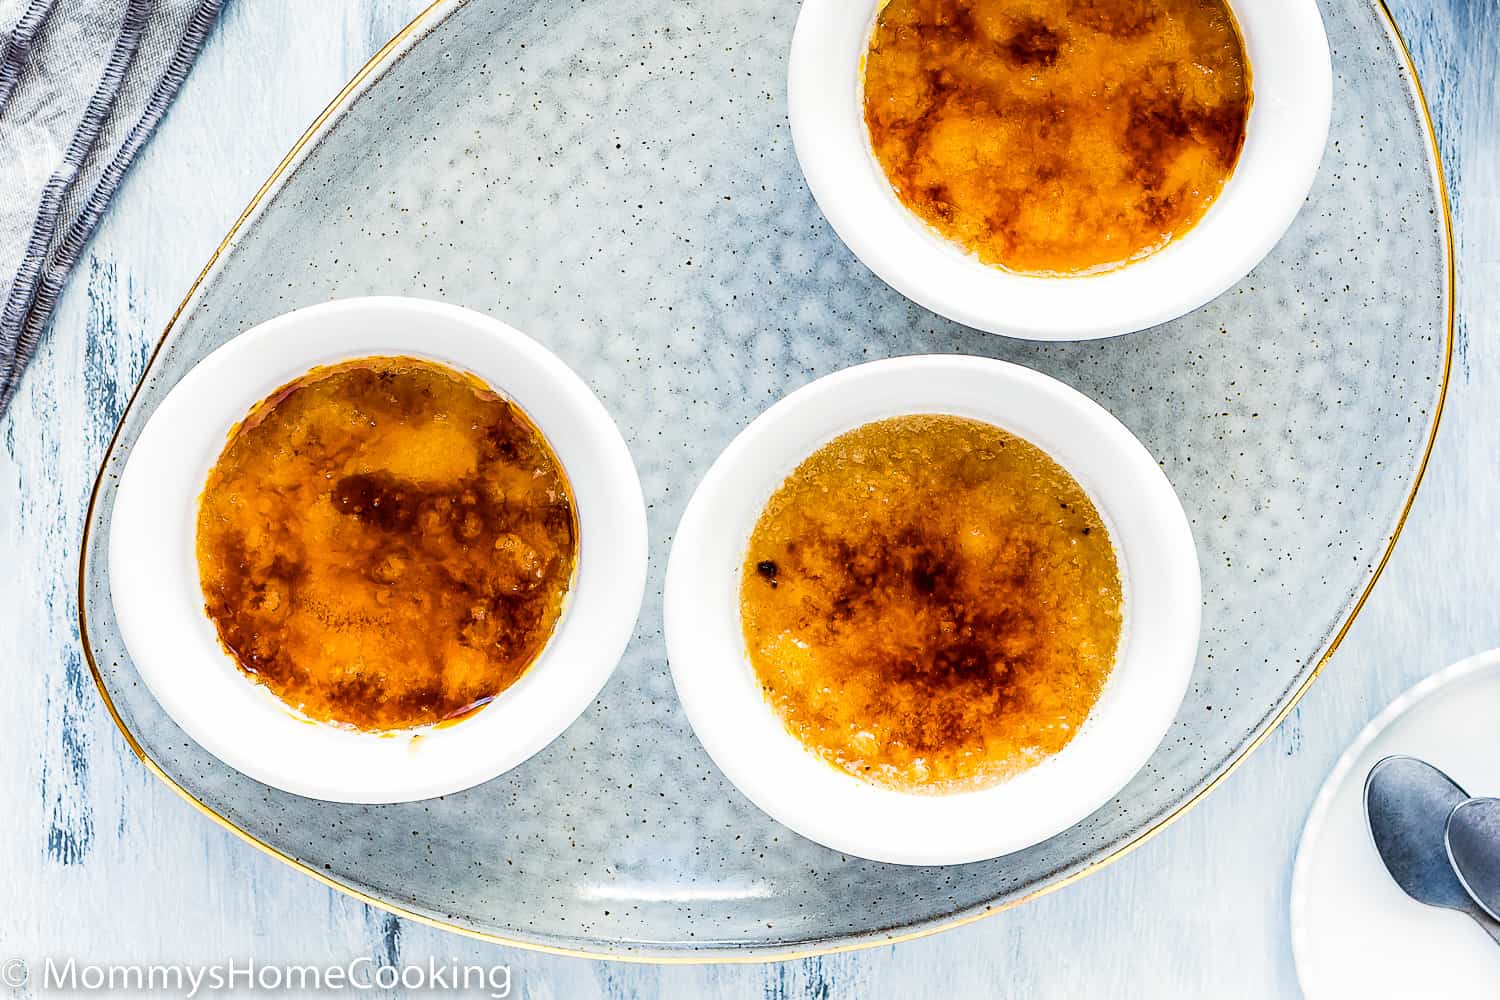 three egg-free creme brulee with a sugar caramelized top over a blue serving plate.